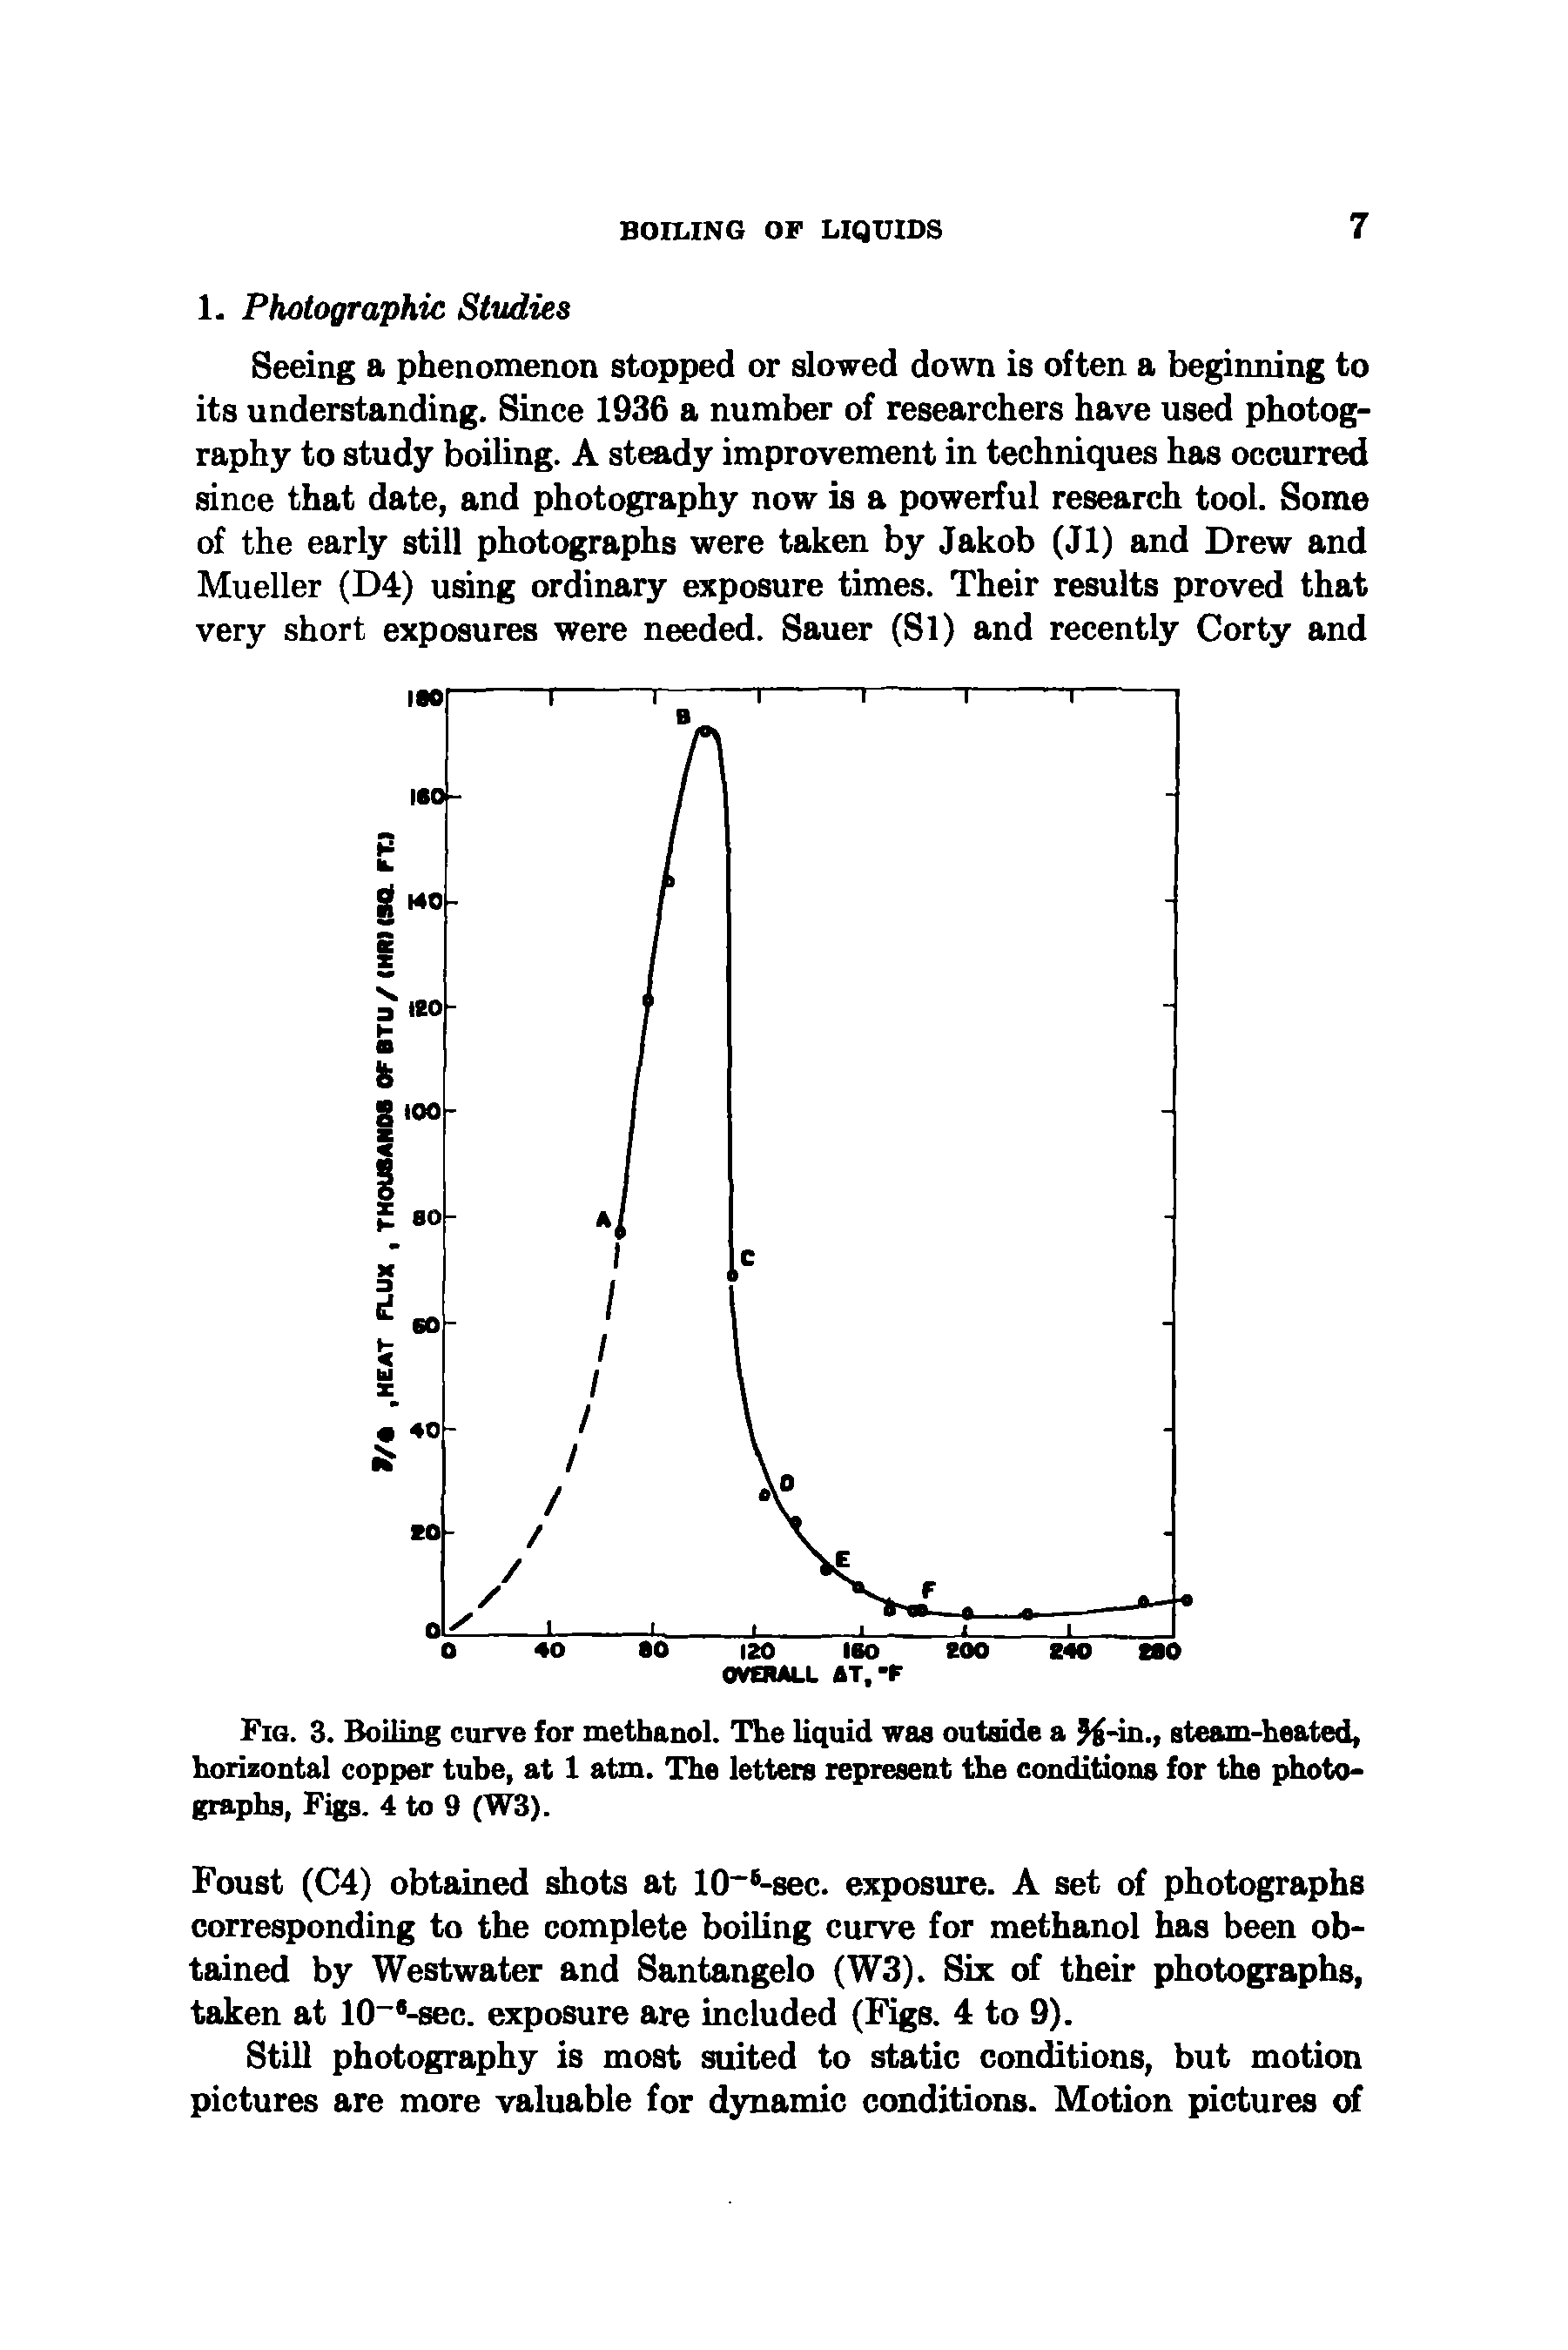 Fig. 3. Boiling curve for methanol. The liquid was outside a %-in., steam-heated, horizontal copper tube, at 1 atm. The letters represent the conditions for the photographs, Figs. 4 to 9 (W3).